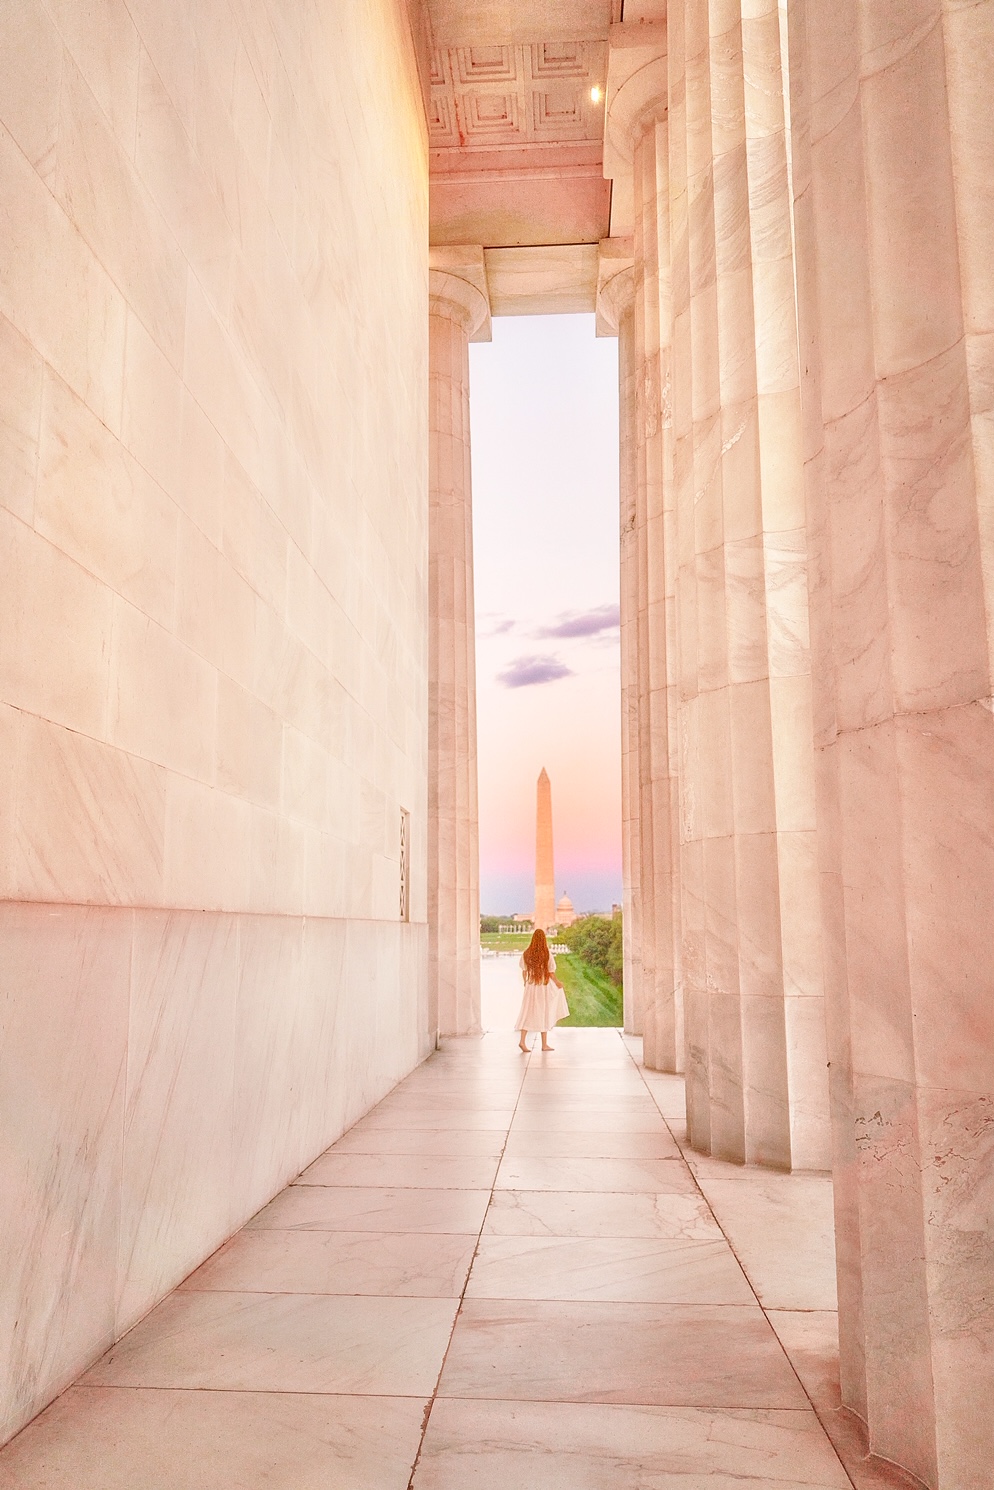 Looking down the corridor of the Lincoln Memorial. At the end of the corridor there is a woman wearing a white dress with long hair standing facing the Washington Monument in the distance. 